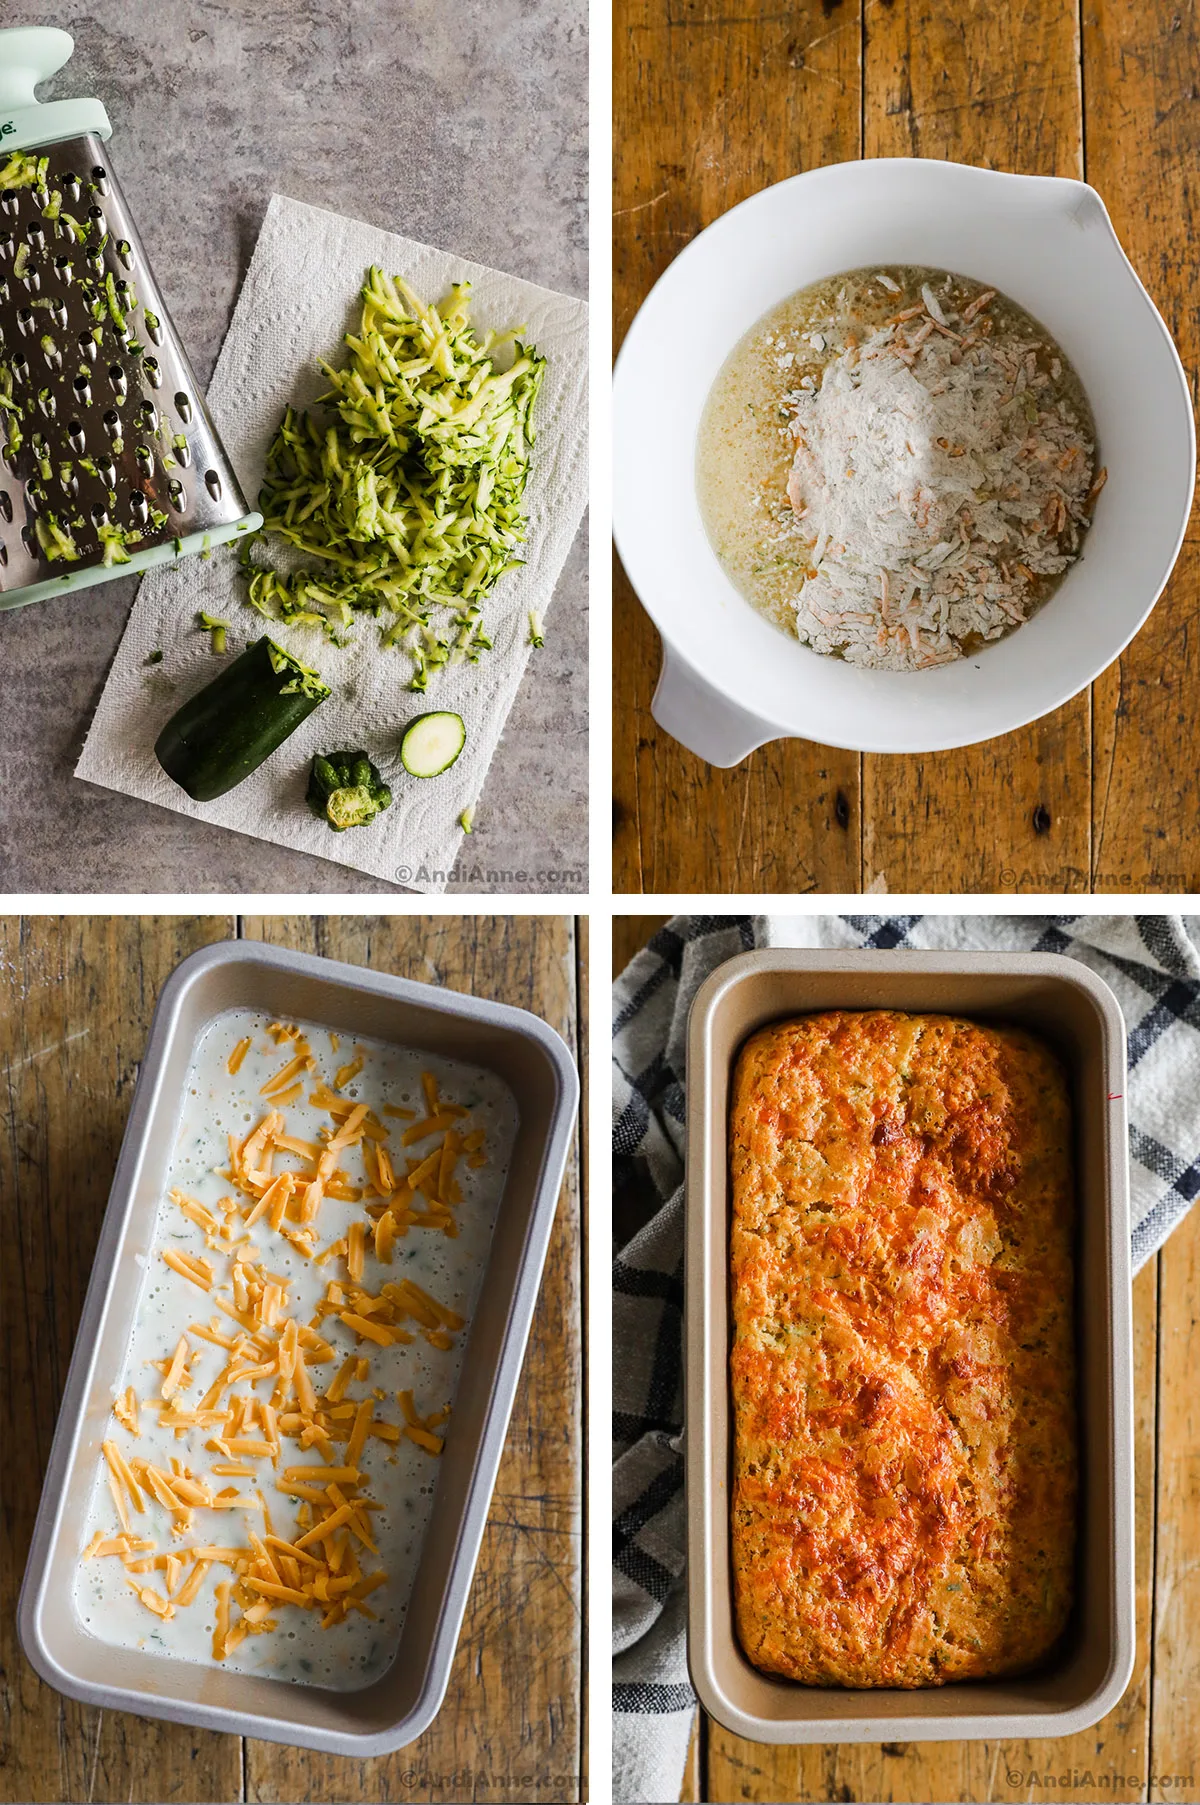 Four images showing steps to make recipe. First is shredded zucchini, second is bowl with dry ingredients dumped on top of wet ingredients, third is batter poured into loaf pan, fourth is baked bread.